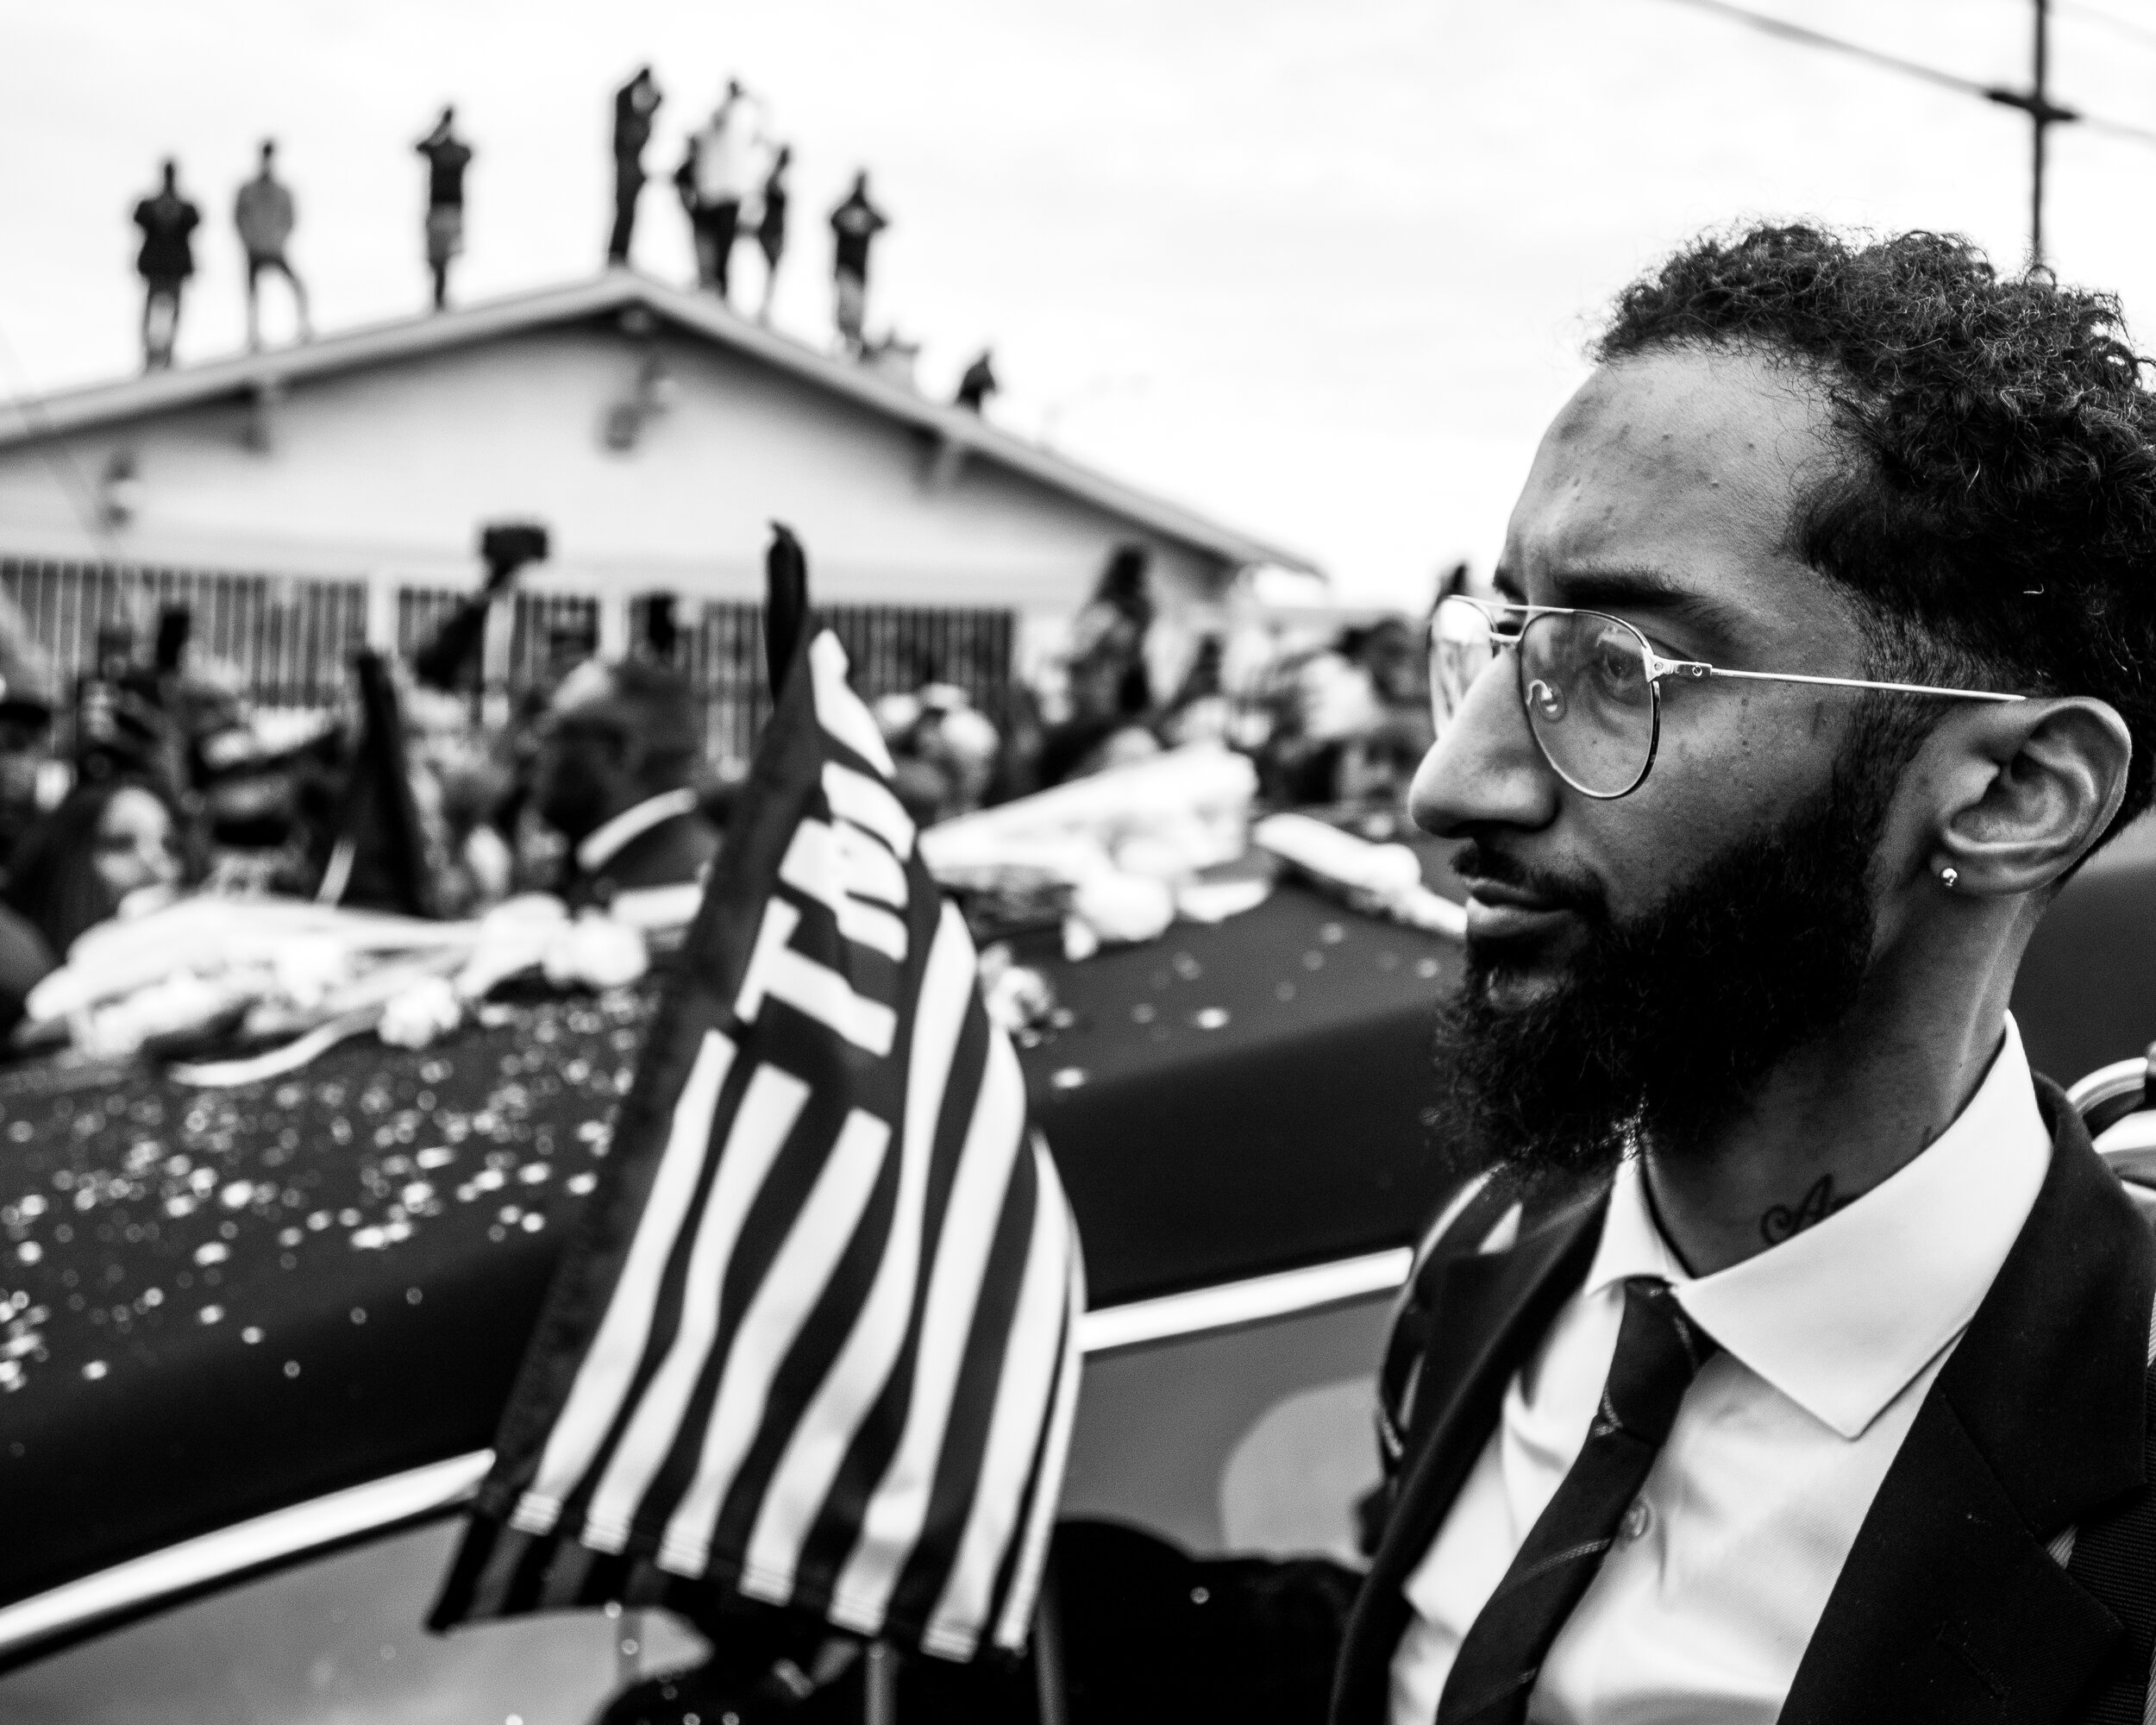  Samiel “Blacc Sam” Asghedom walks down Slauson Avenue next to the hearse carrying his younger brother, Nipsey Hussle, as the funeral procession nears The Marathon Clothing Store. 